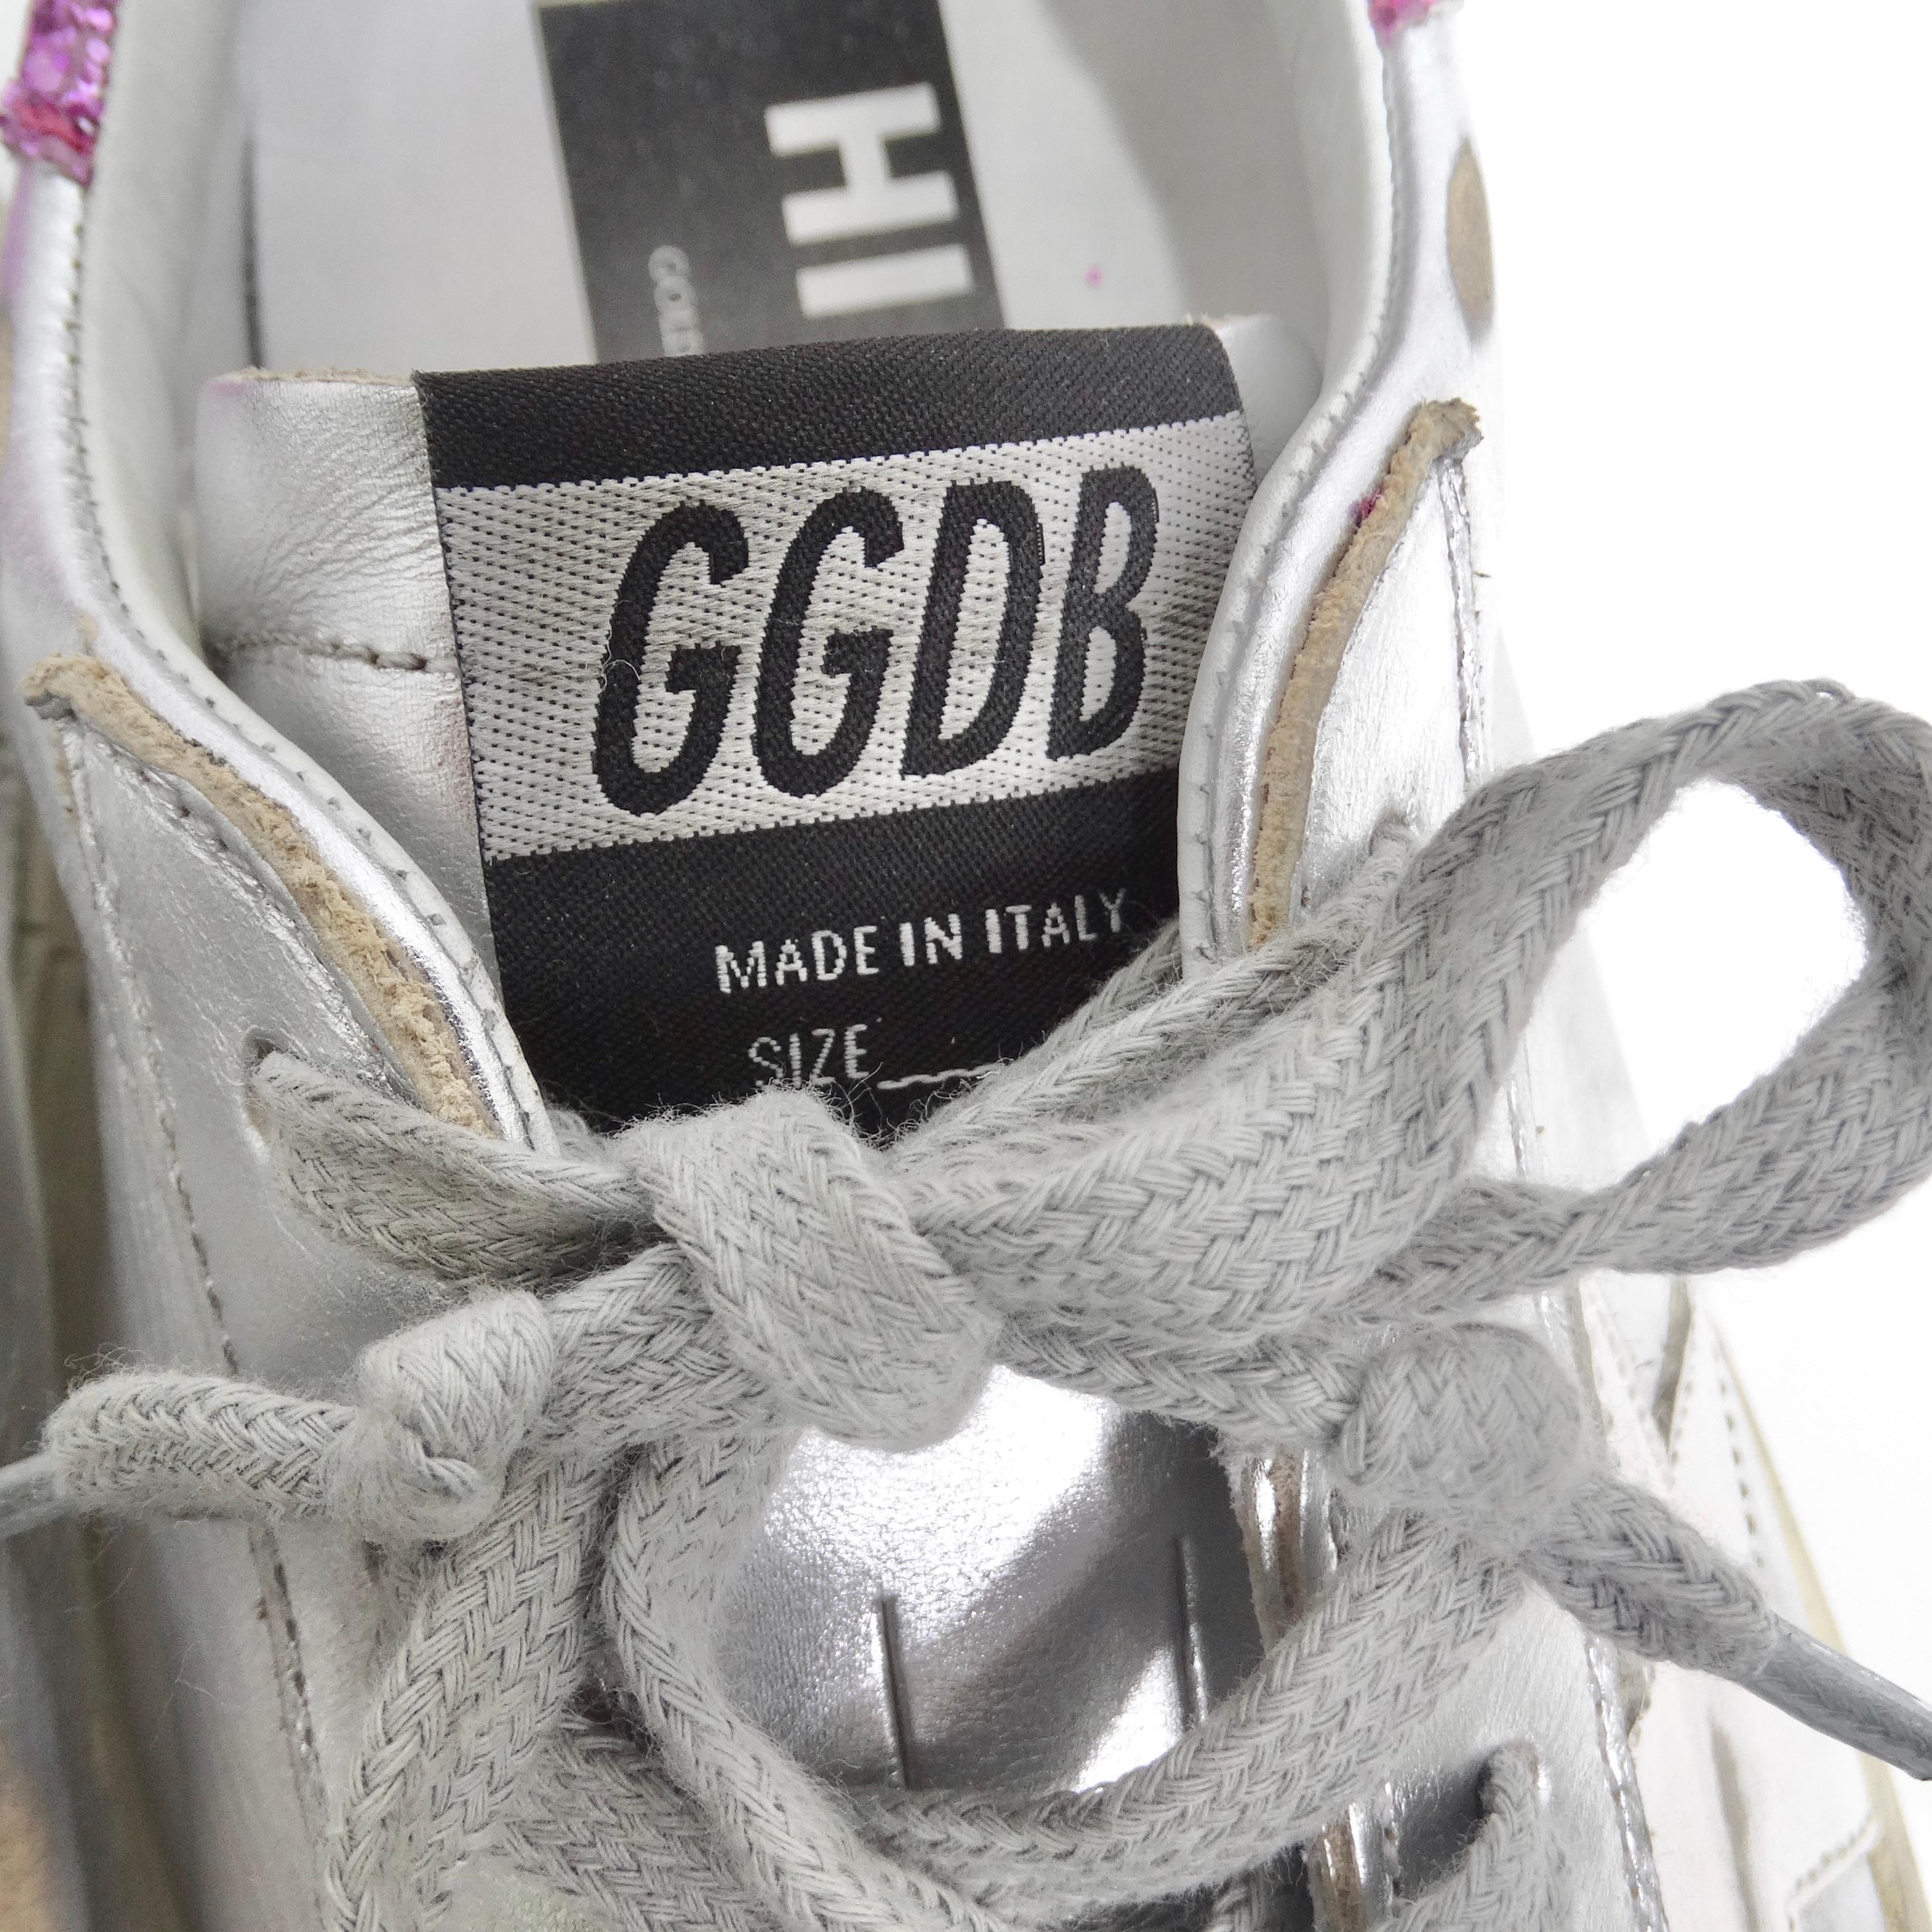 Golden Goose Silver/Pink Leather And Glitter Superstar Low Top Sneakers In Excellent Condition For Sale In Scottsdale, AZ